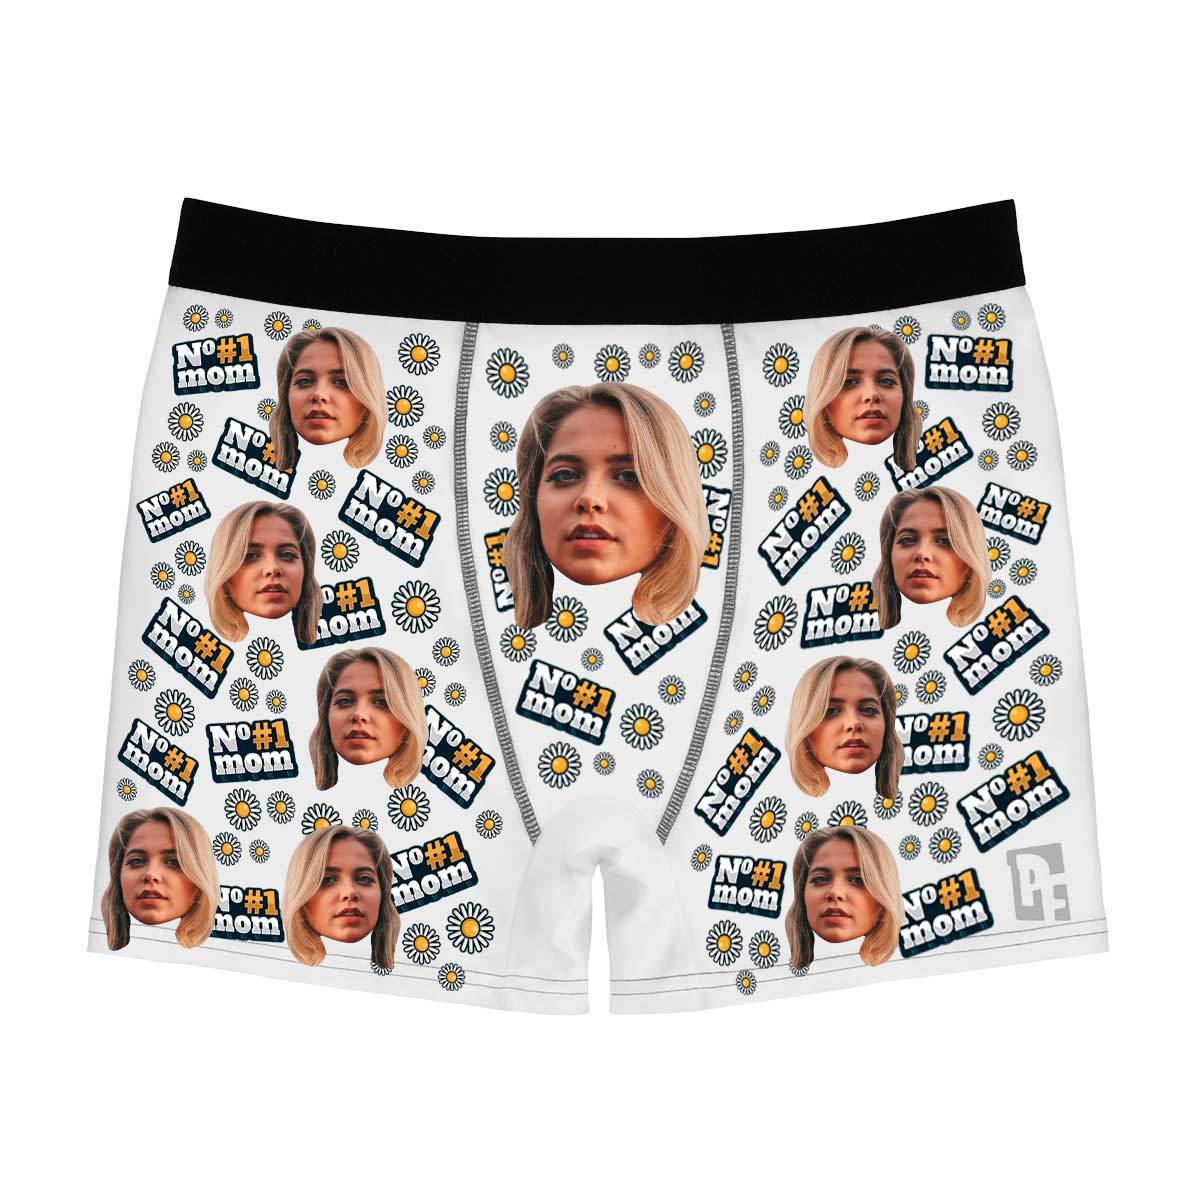 White #1 Mom men's boxer briefs personalized with photo printed on them